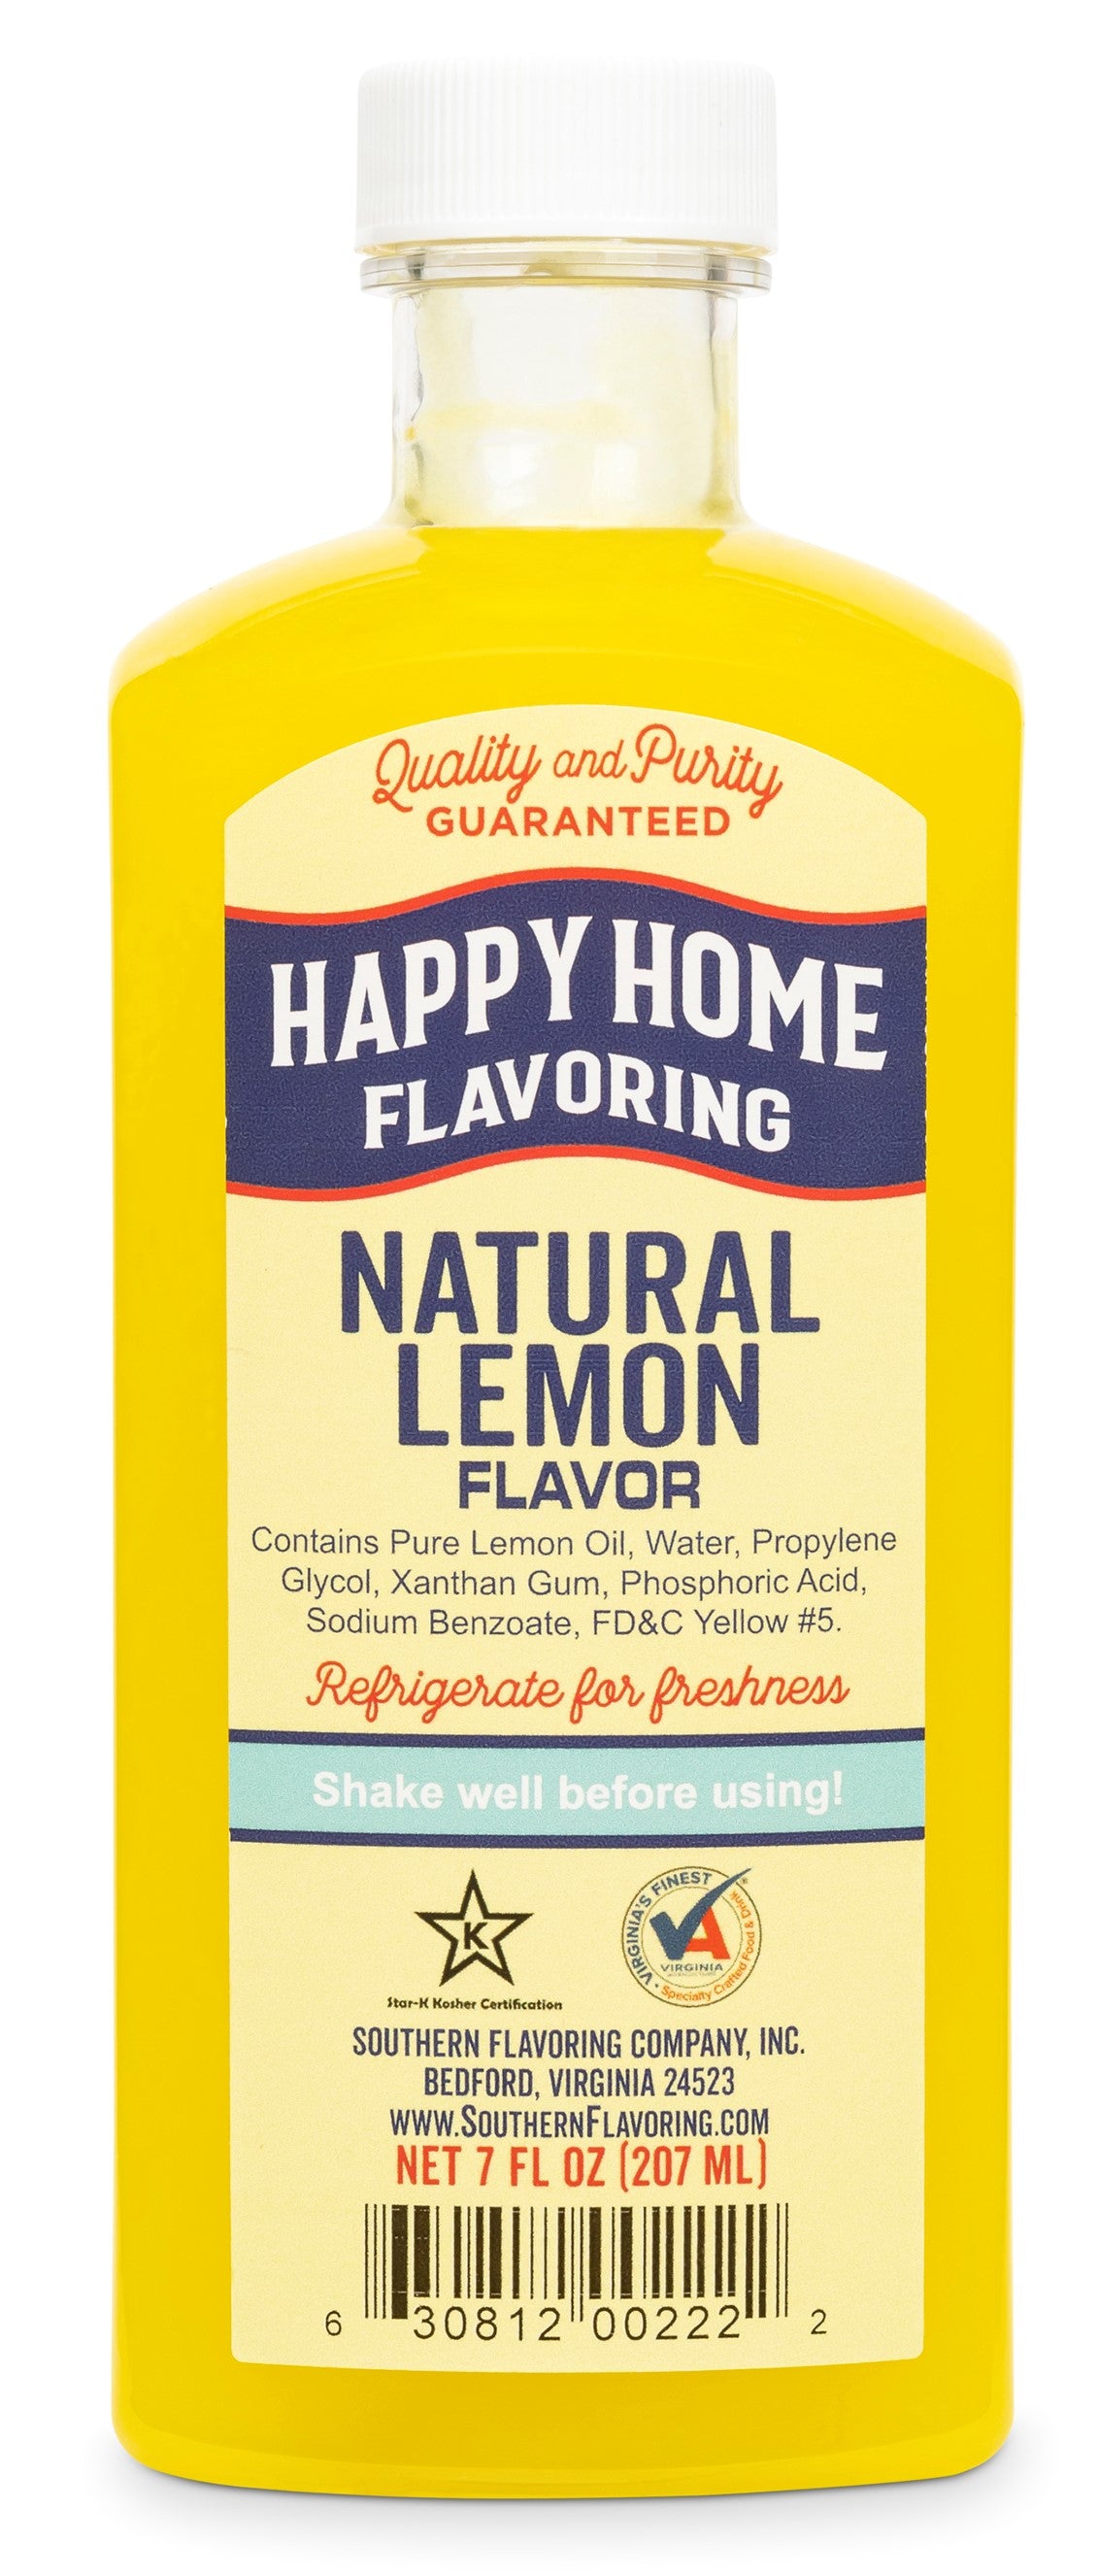 Natural Lemon Flavor - Southern Flavoring – Southern Flavoring Company